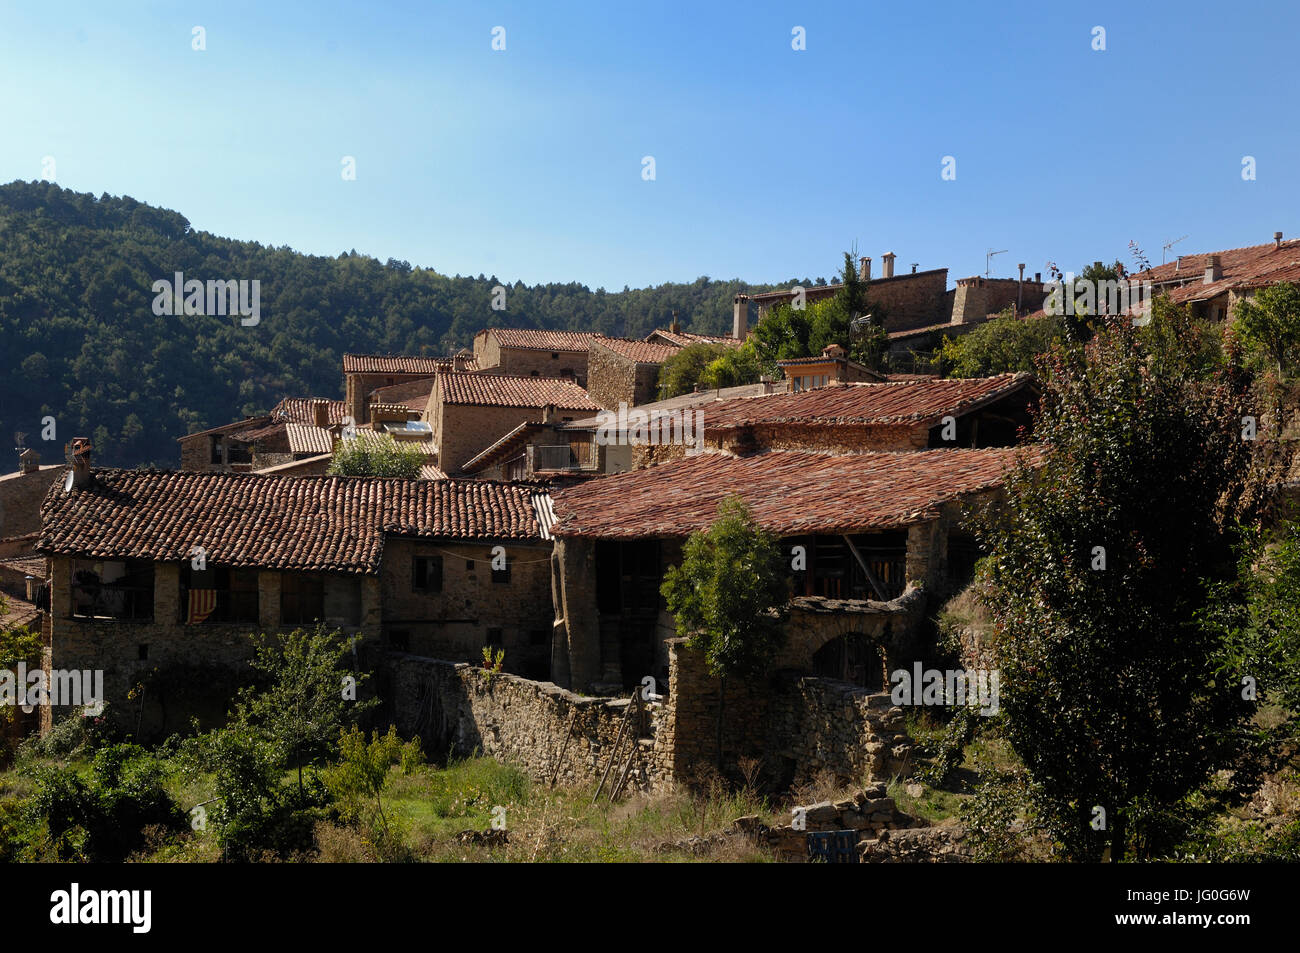 Village of Arseguel, LLeida province, Spain Stock Photo